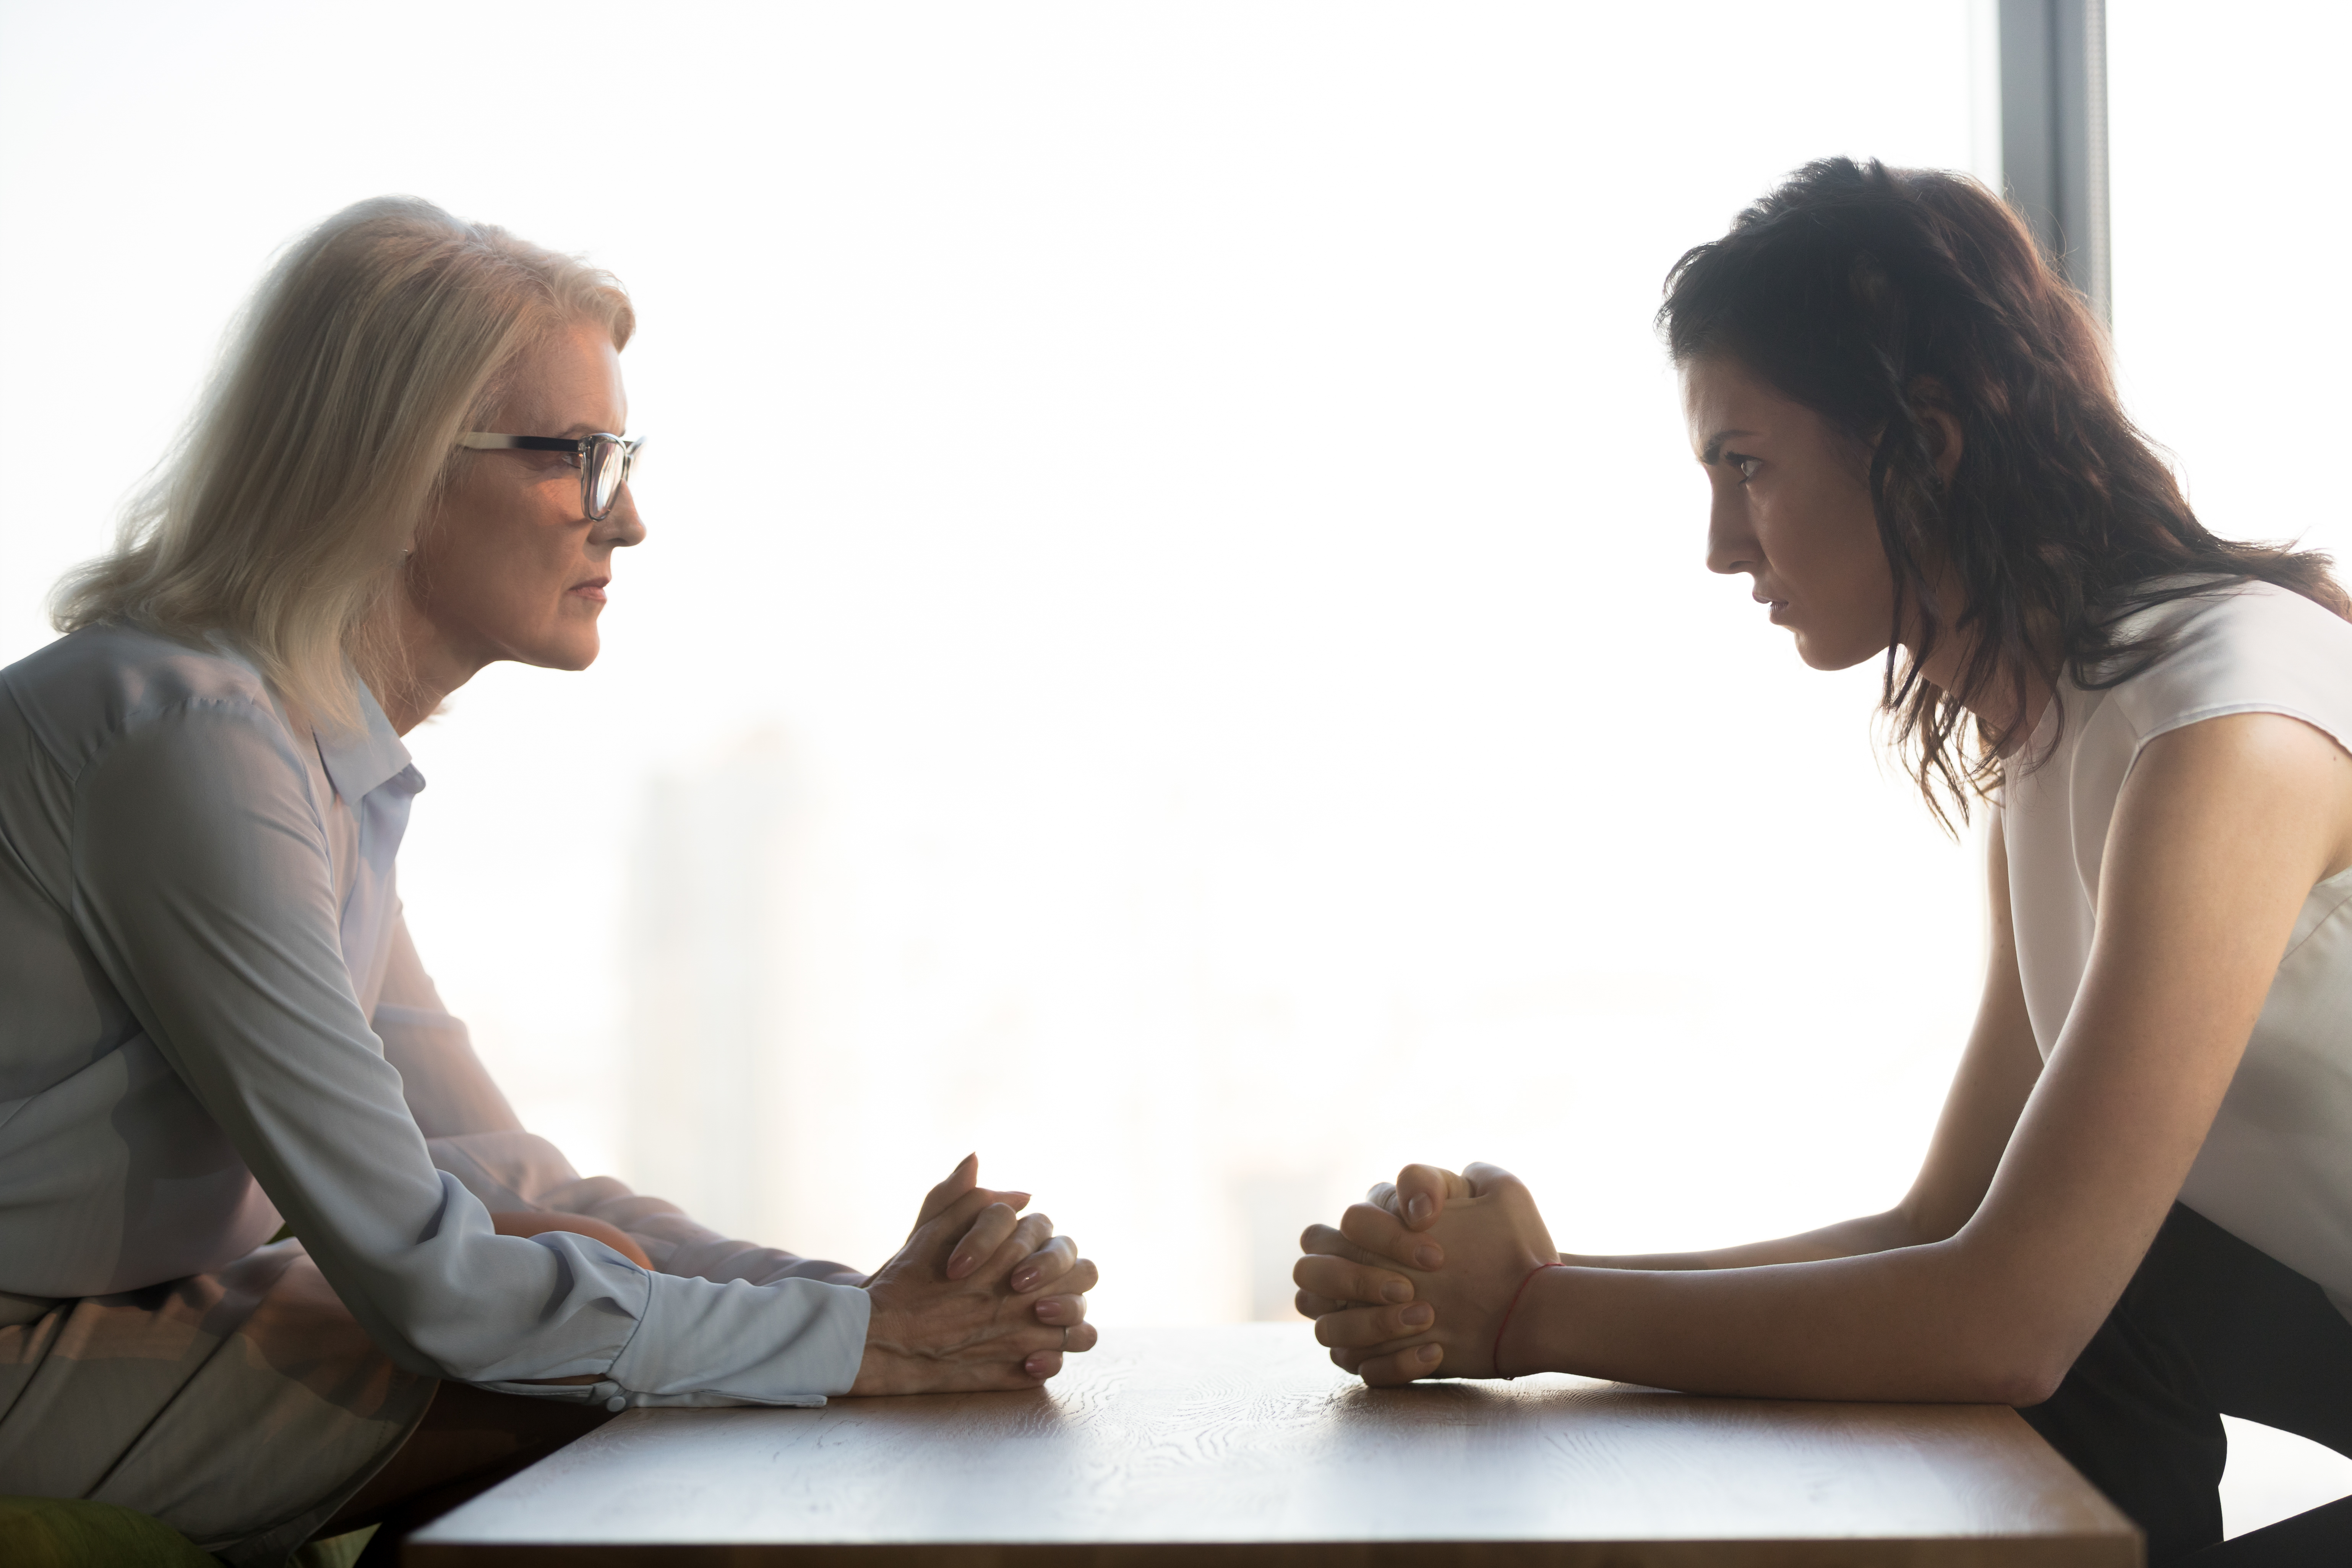 Two women looking angrily at each other | Source: Shutterstock